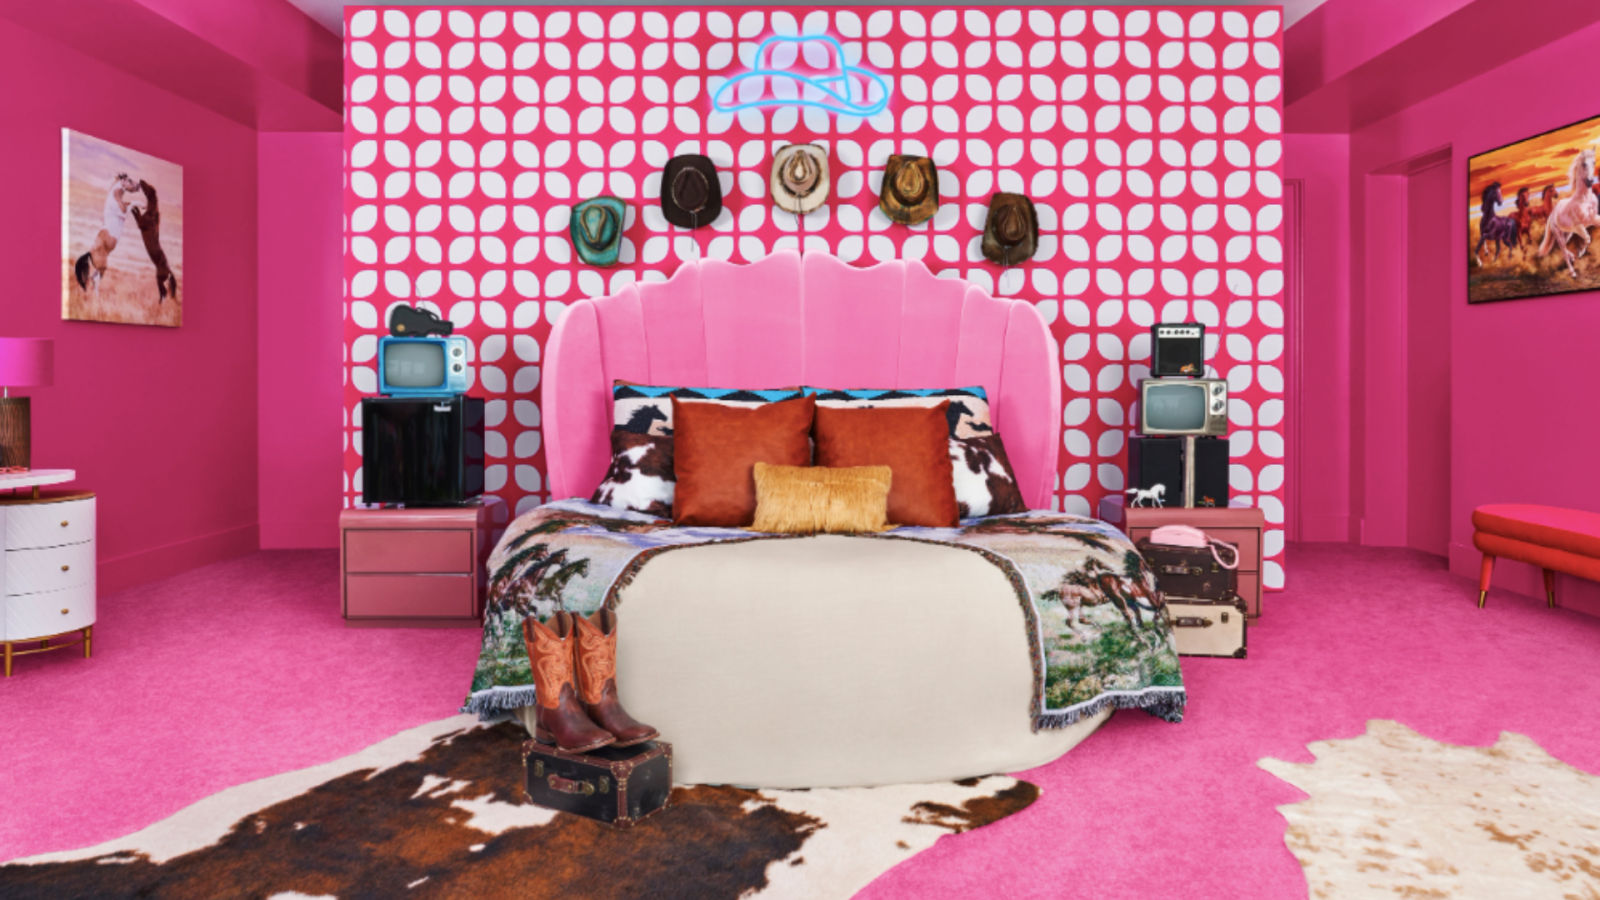 3 home décor musts inspired by Barbie's Dream House